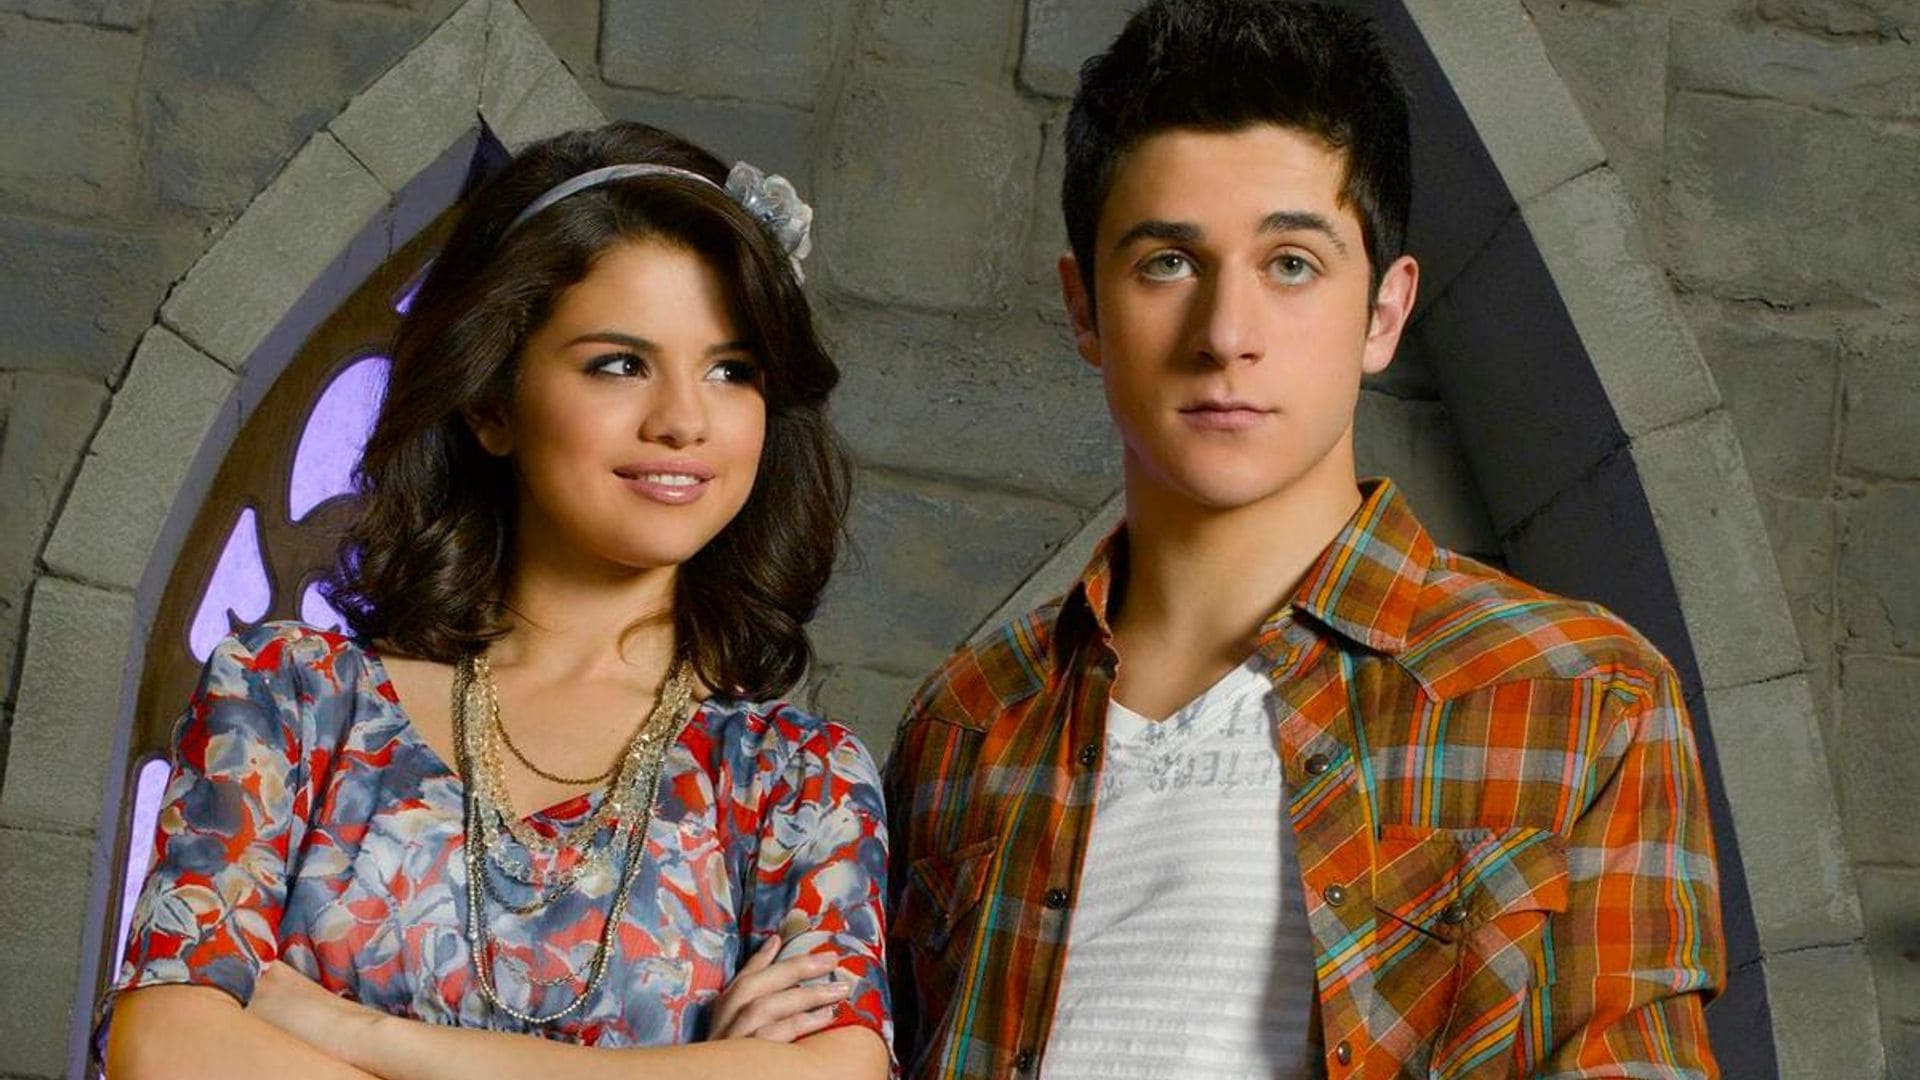 Selena Gomez is back for ‘Wizards Of Waverly Place’ sequel with David Henrie: More details